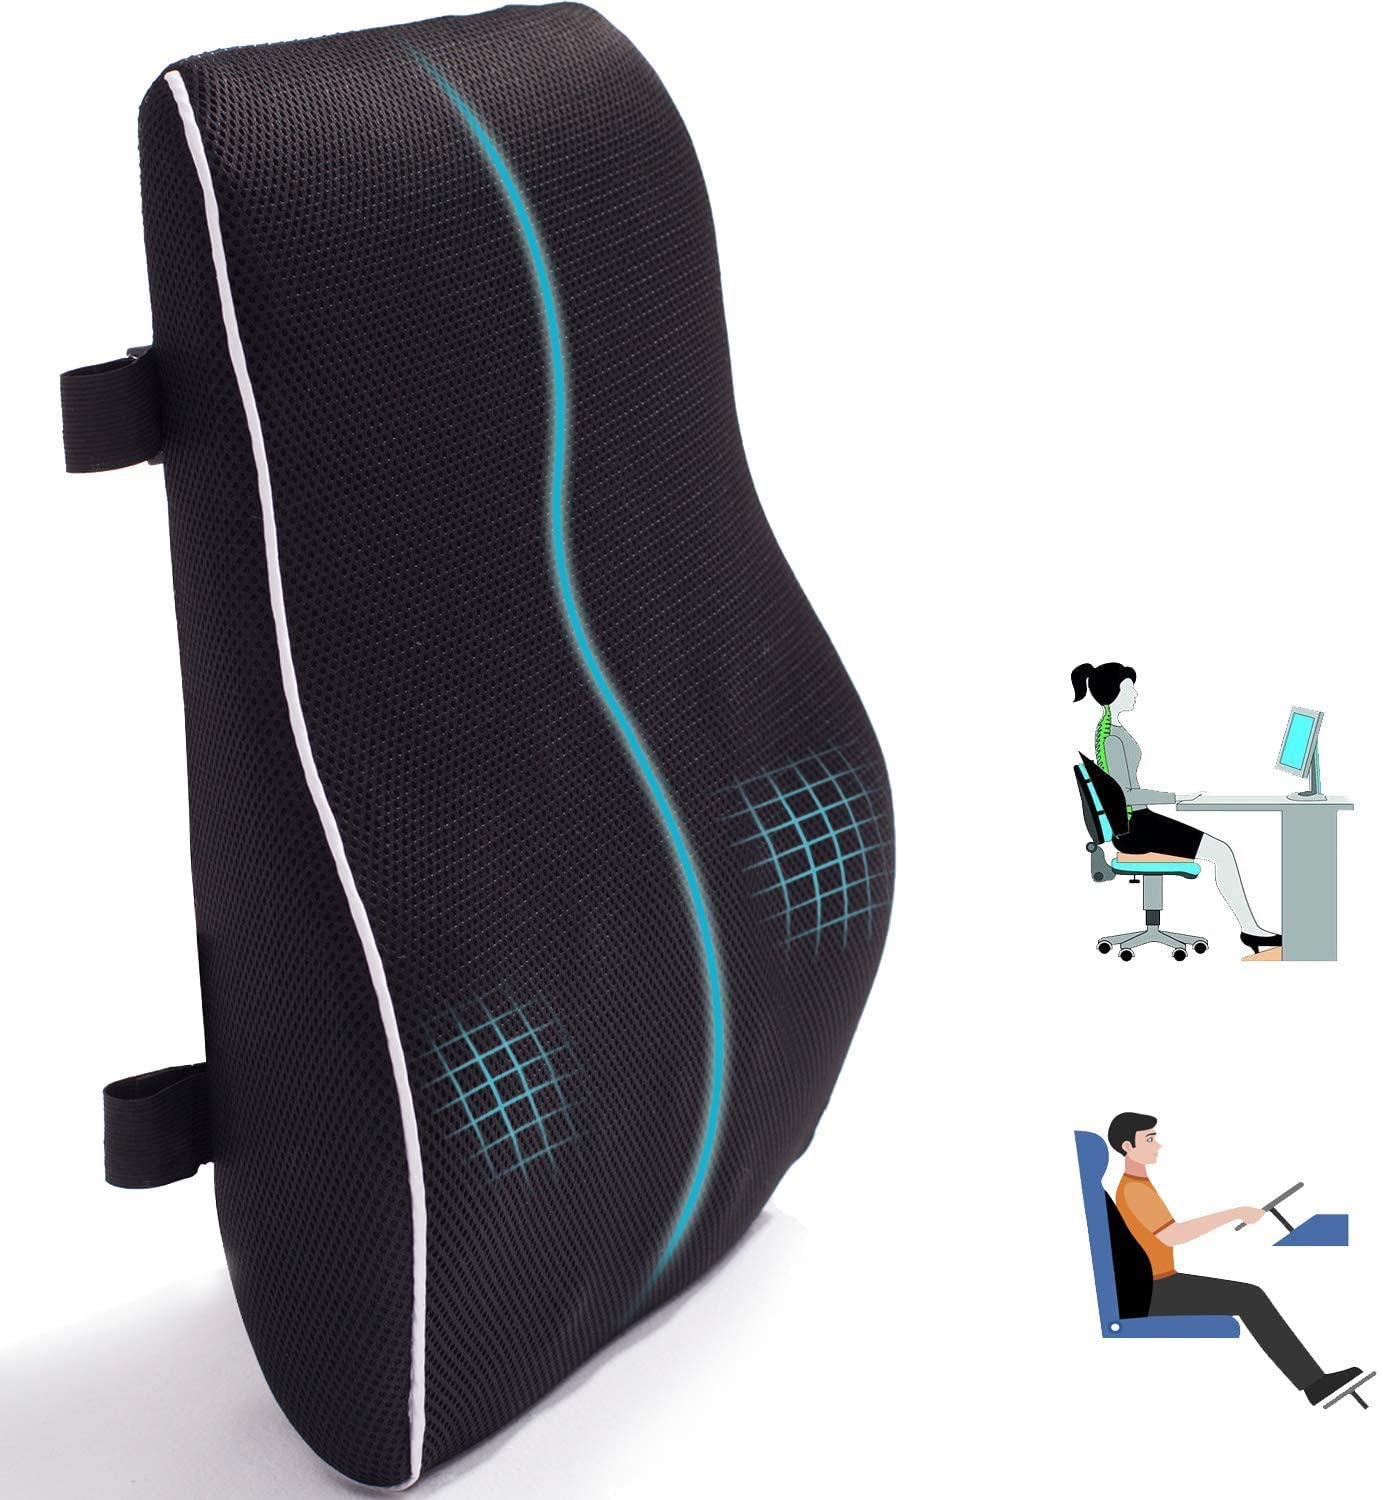 Big Hippo Lumbar Support Pillow - Memory Foam Lumbar Pillow Back Cushion  Designed for Lower Back Pain Relief- Ideal Back Pillow for Office Chair,  Car Seat and Wheelchair 